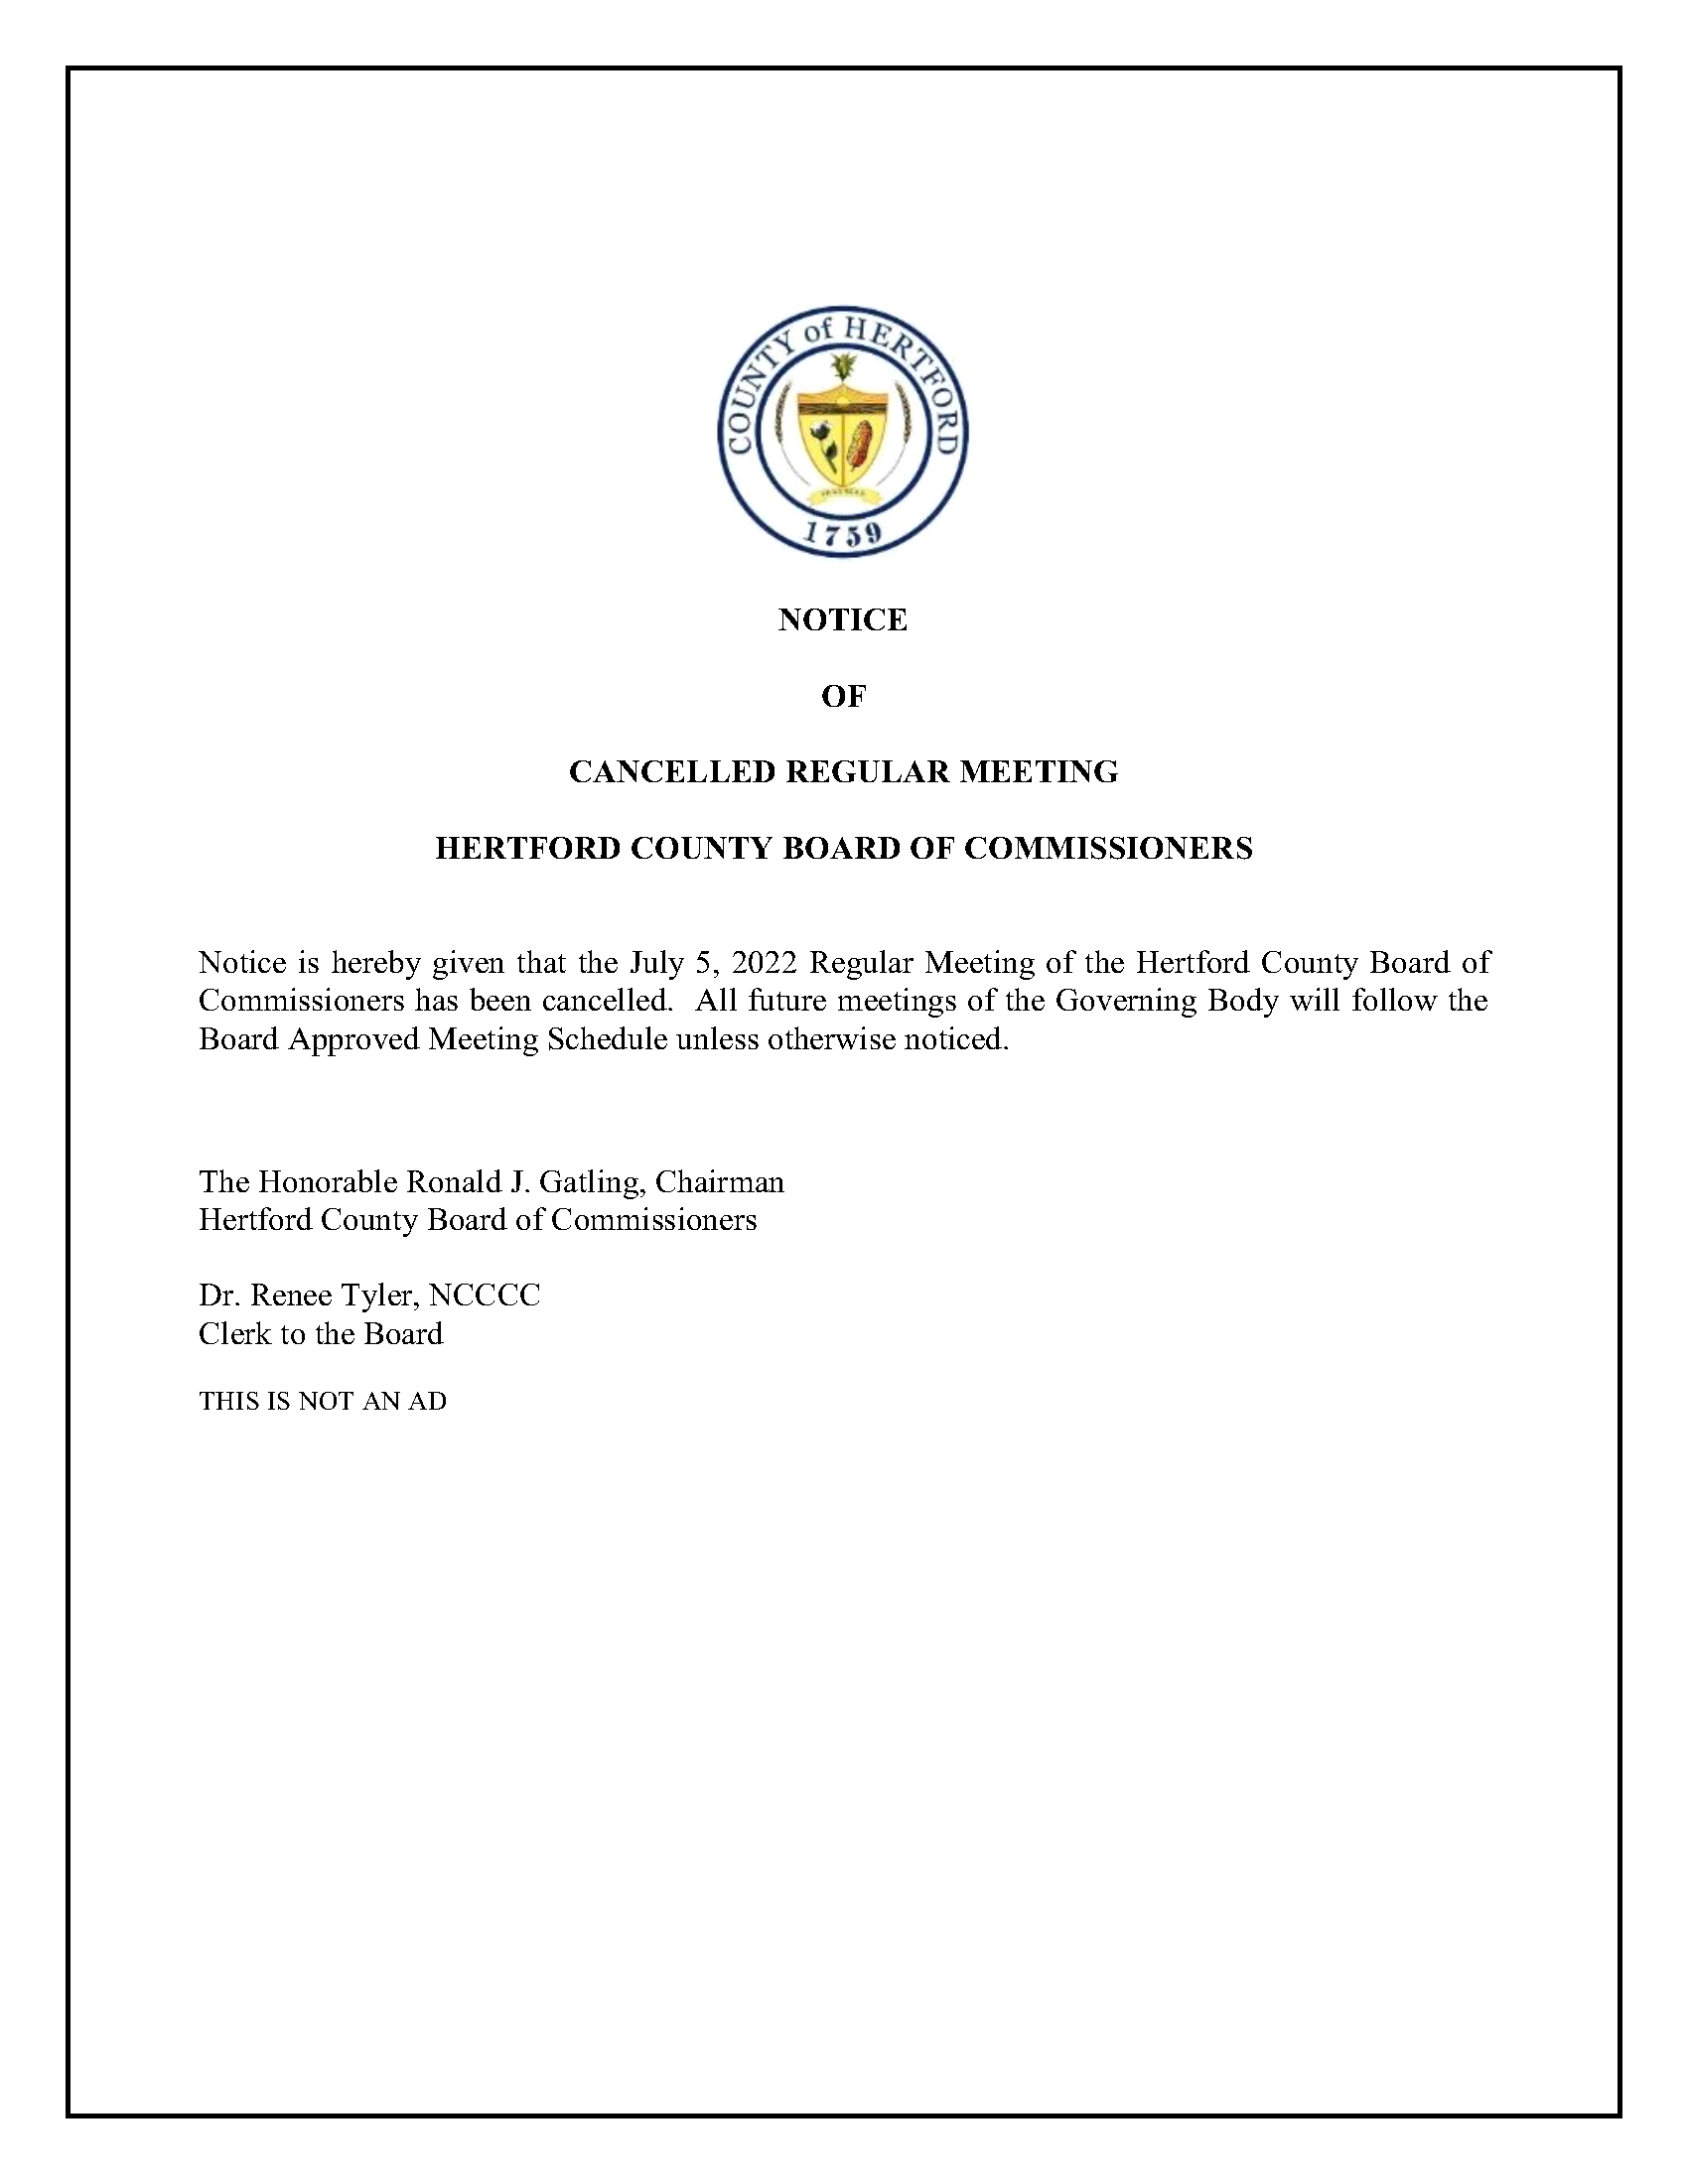 NOTICE of Cancelled Meeting_07052022